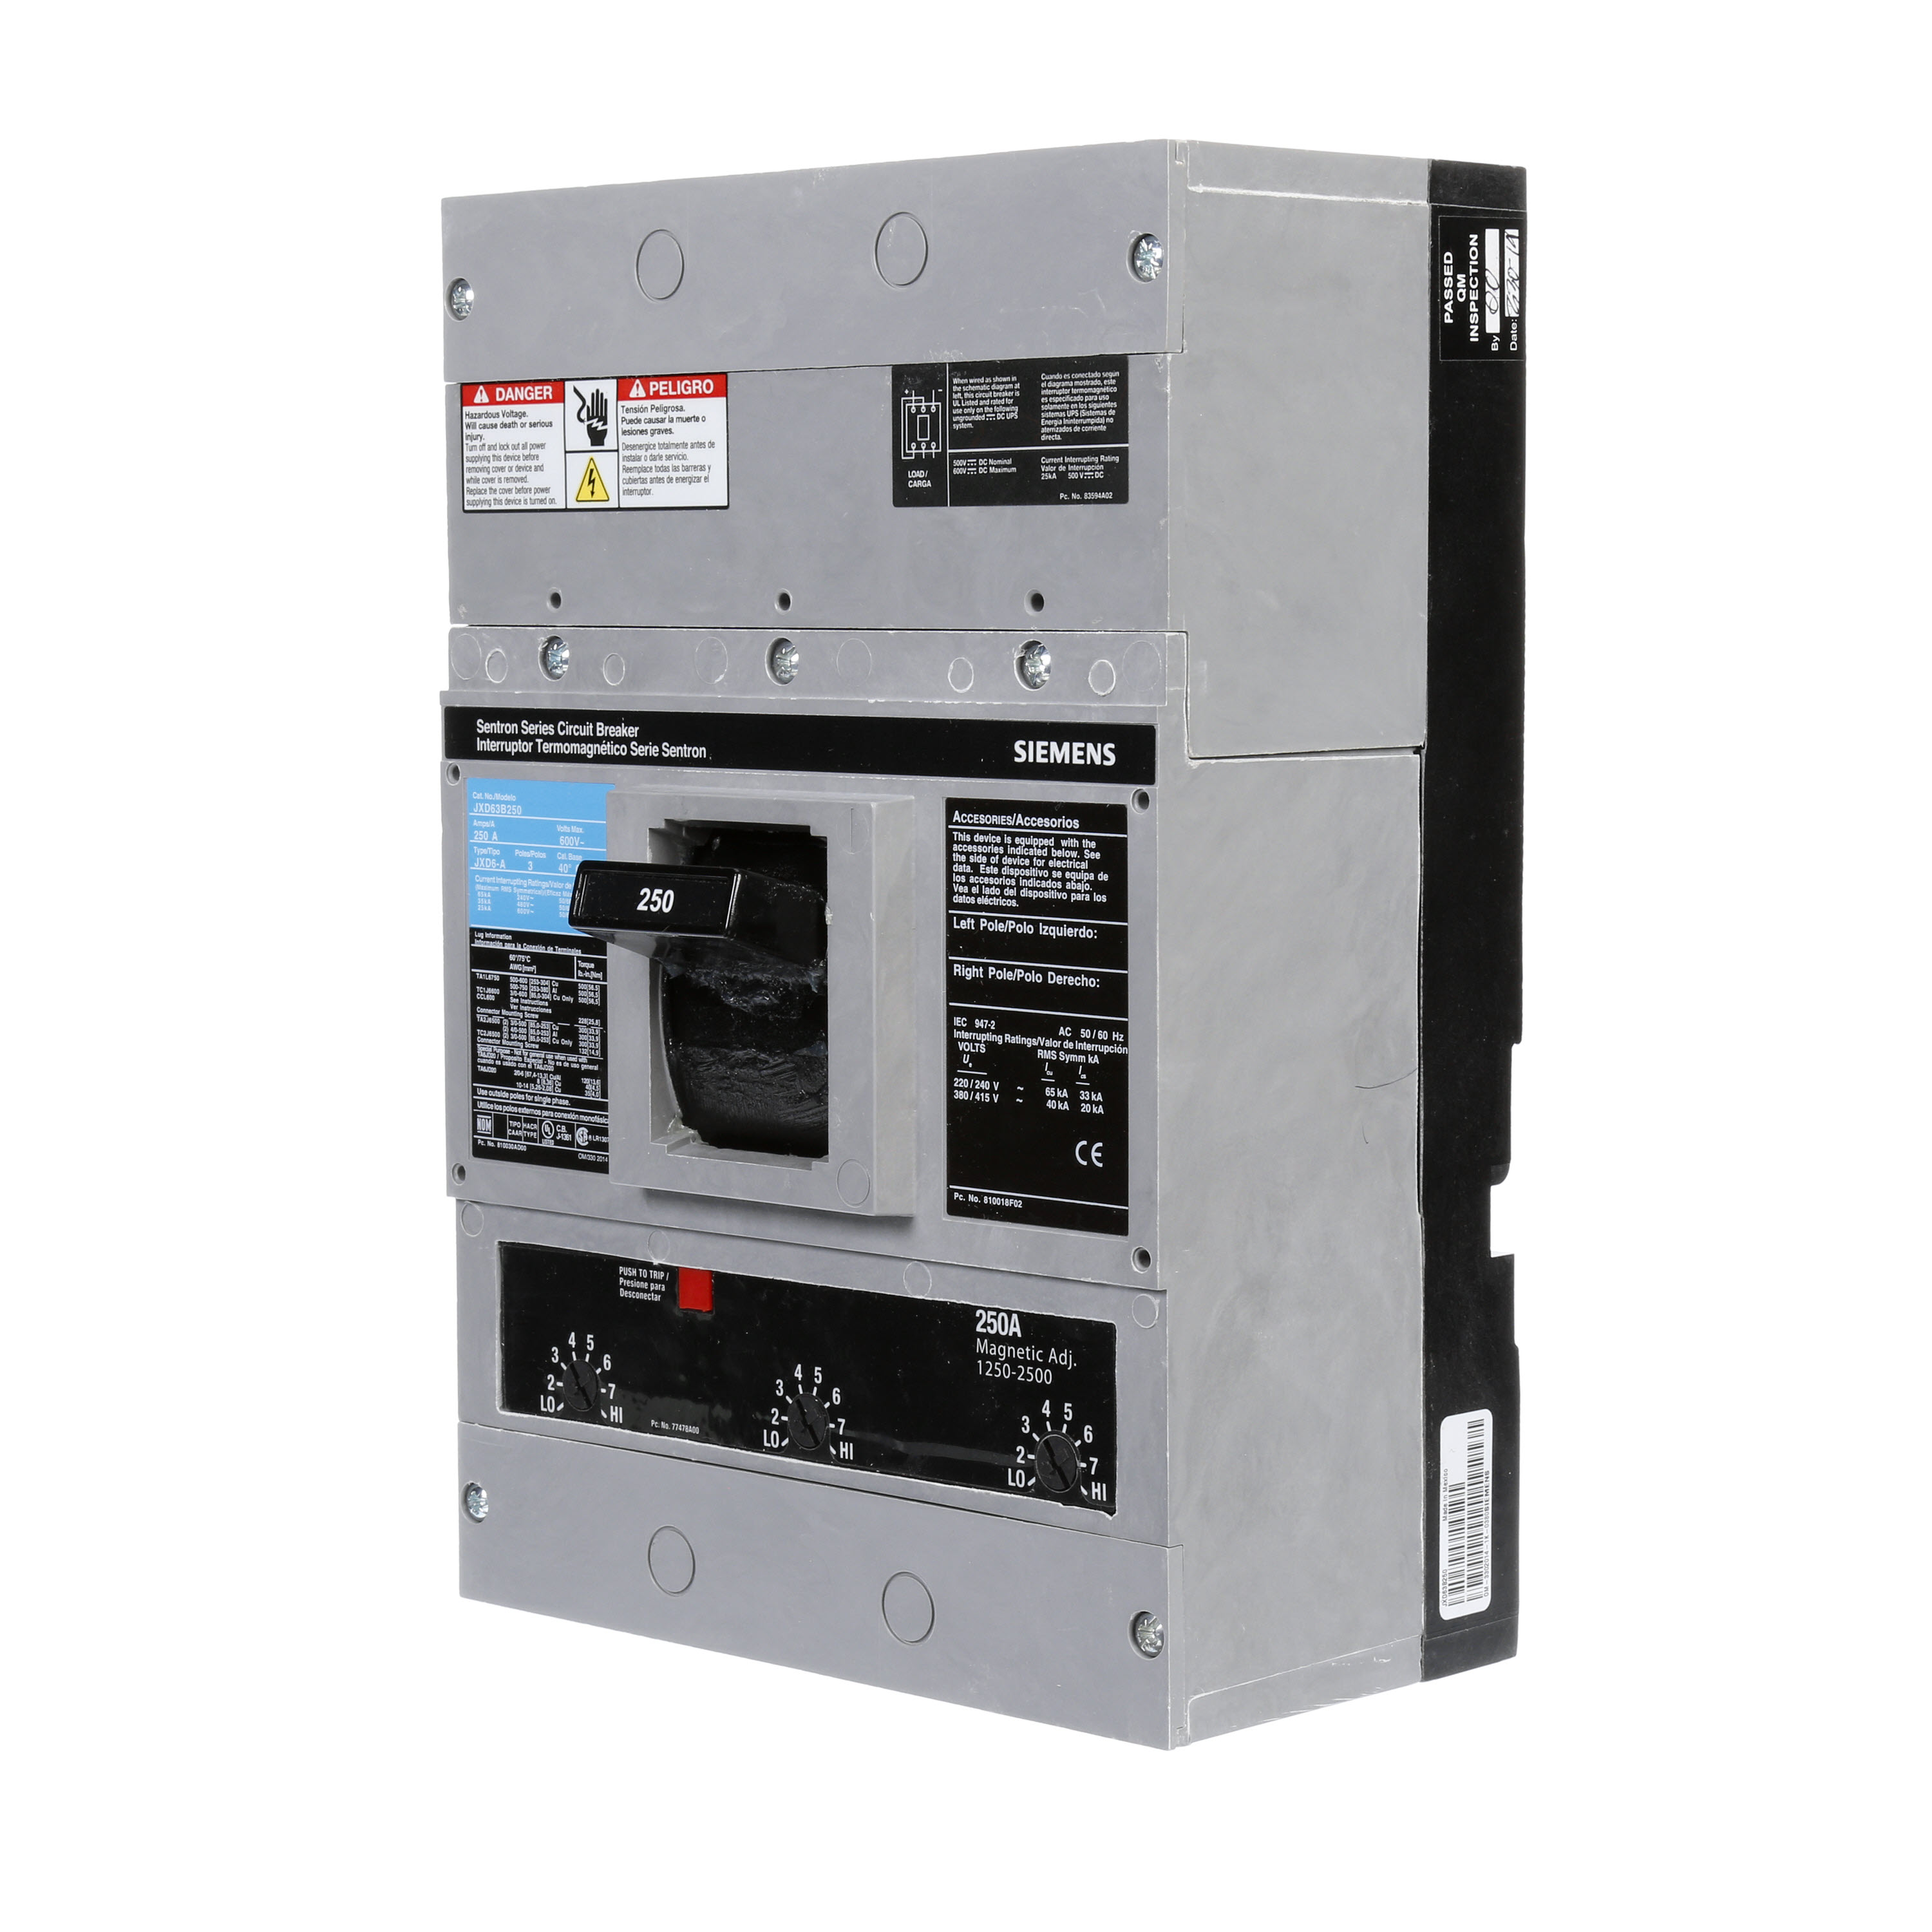 SIEMENS LOW VOLTAGE SENTRON MOLDED CASE CIRCUIT BREAKER WITH THERMAL - MAGNETICTRIP UNIT. ASSEMBLED STANDARD 40 DEG C BREAKER JD FRAME WITH STANDARD BREAKING CAPACITY. 250A 3-POLE (25KAIC AT 600V) (35KAIC AT 480V). NON-INTERCHANGEABLE TRIP UNIT. SPECIAL FEATURES NO LUGS INSTALLED. DIMENSIONS (W x H x D) IN 7.50 x 11.0 x 4.00.